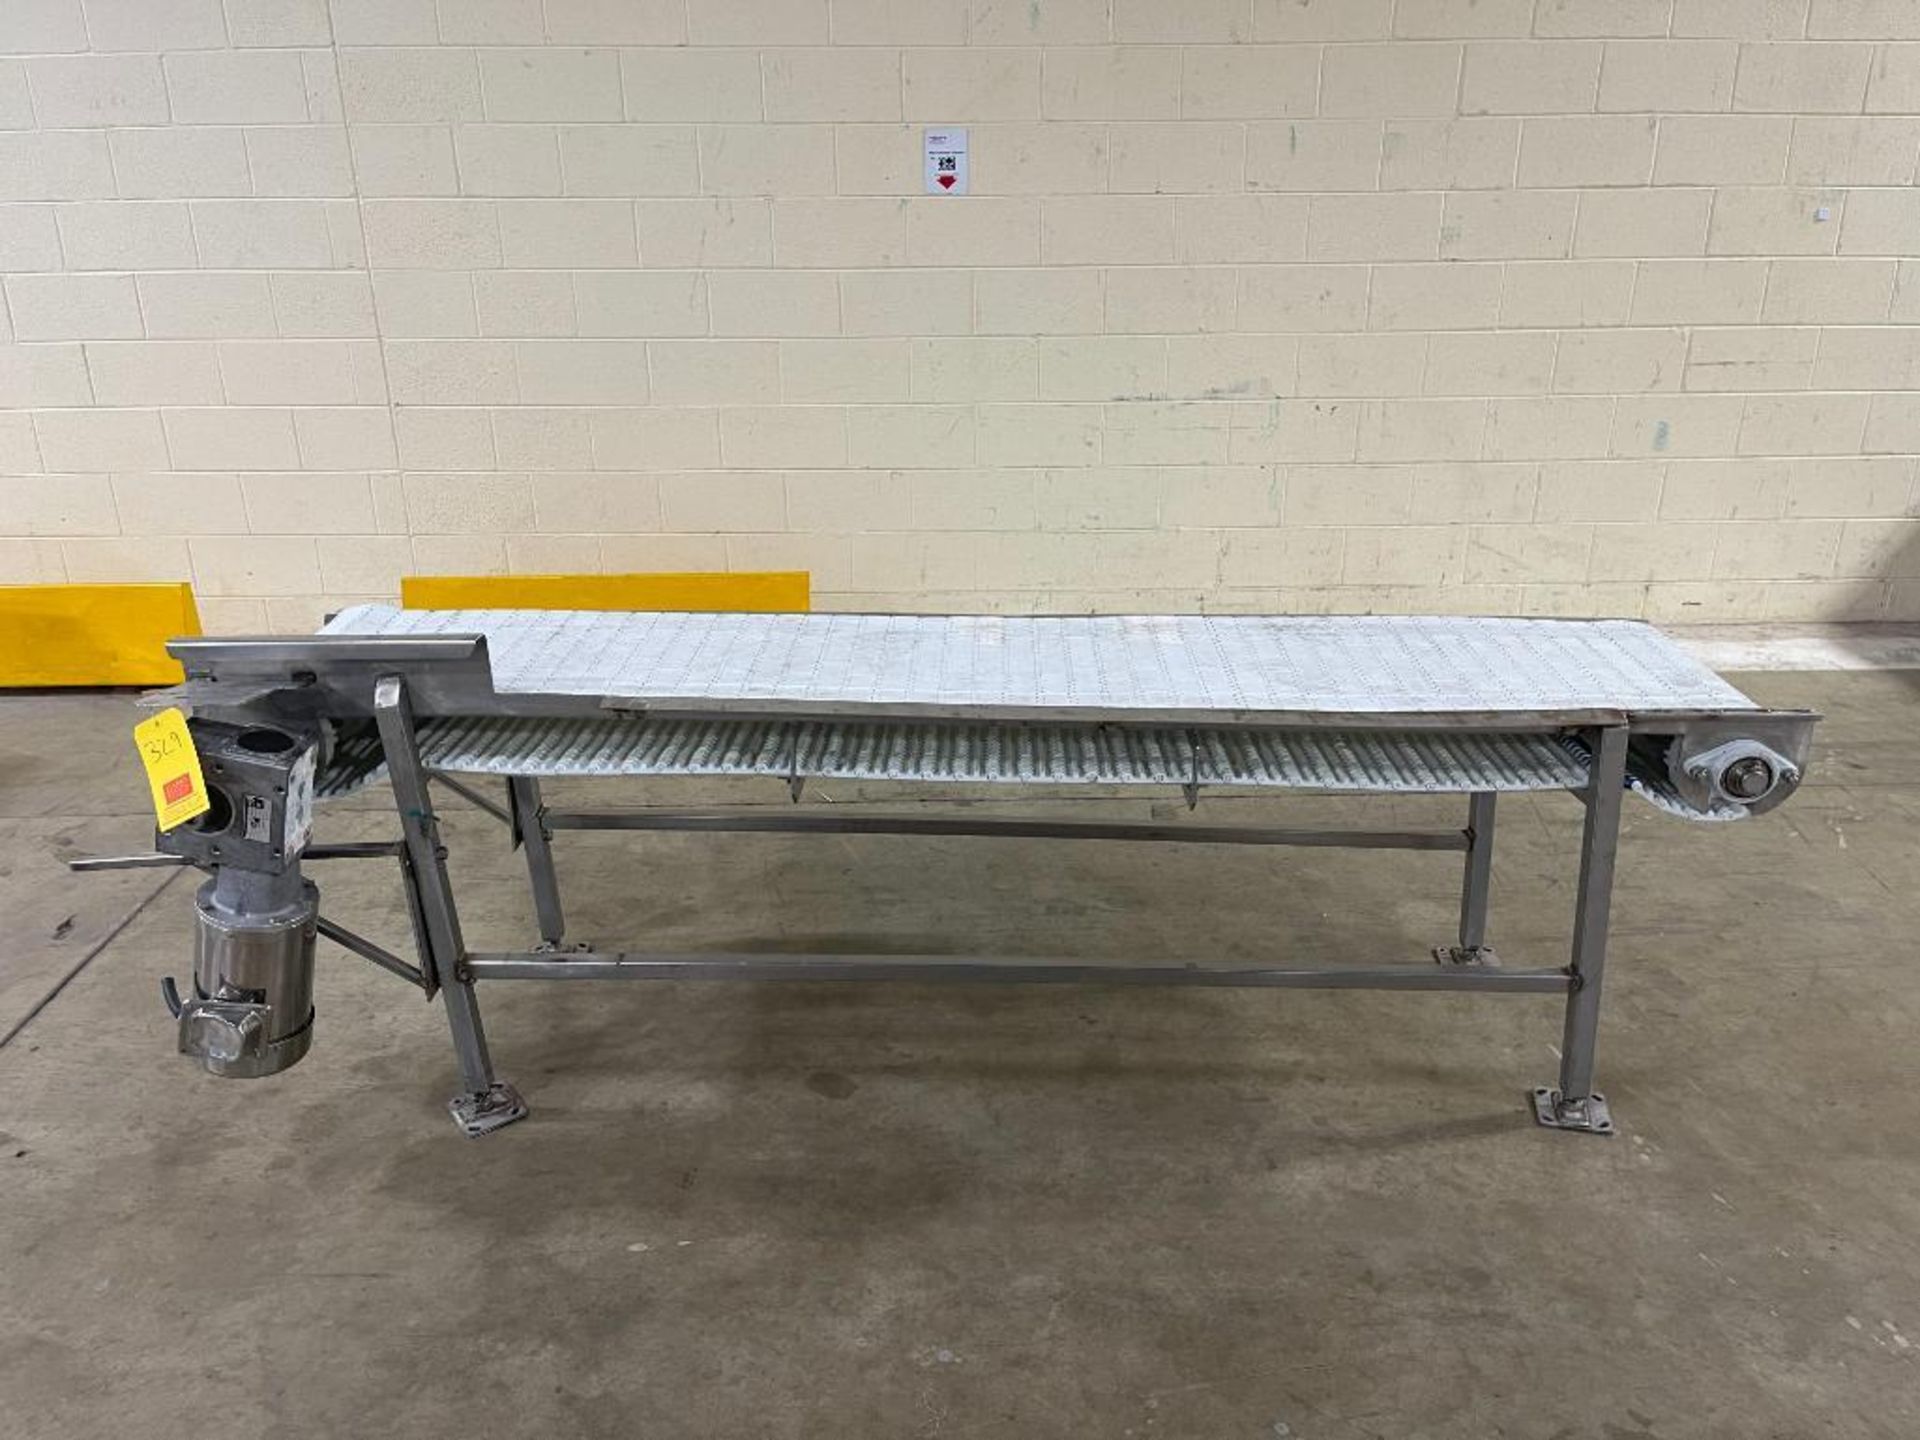 S/S Frame Conveyor with Belt and S/S Drive, 8' Length x 18" Width (Location: Denver, CO)